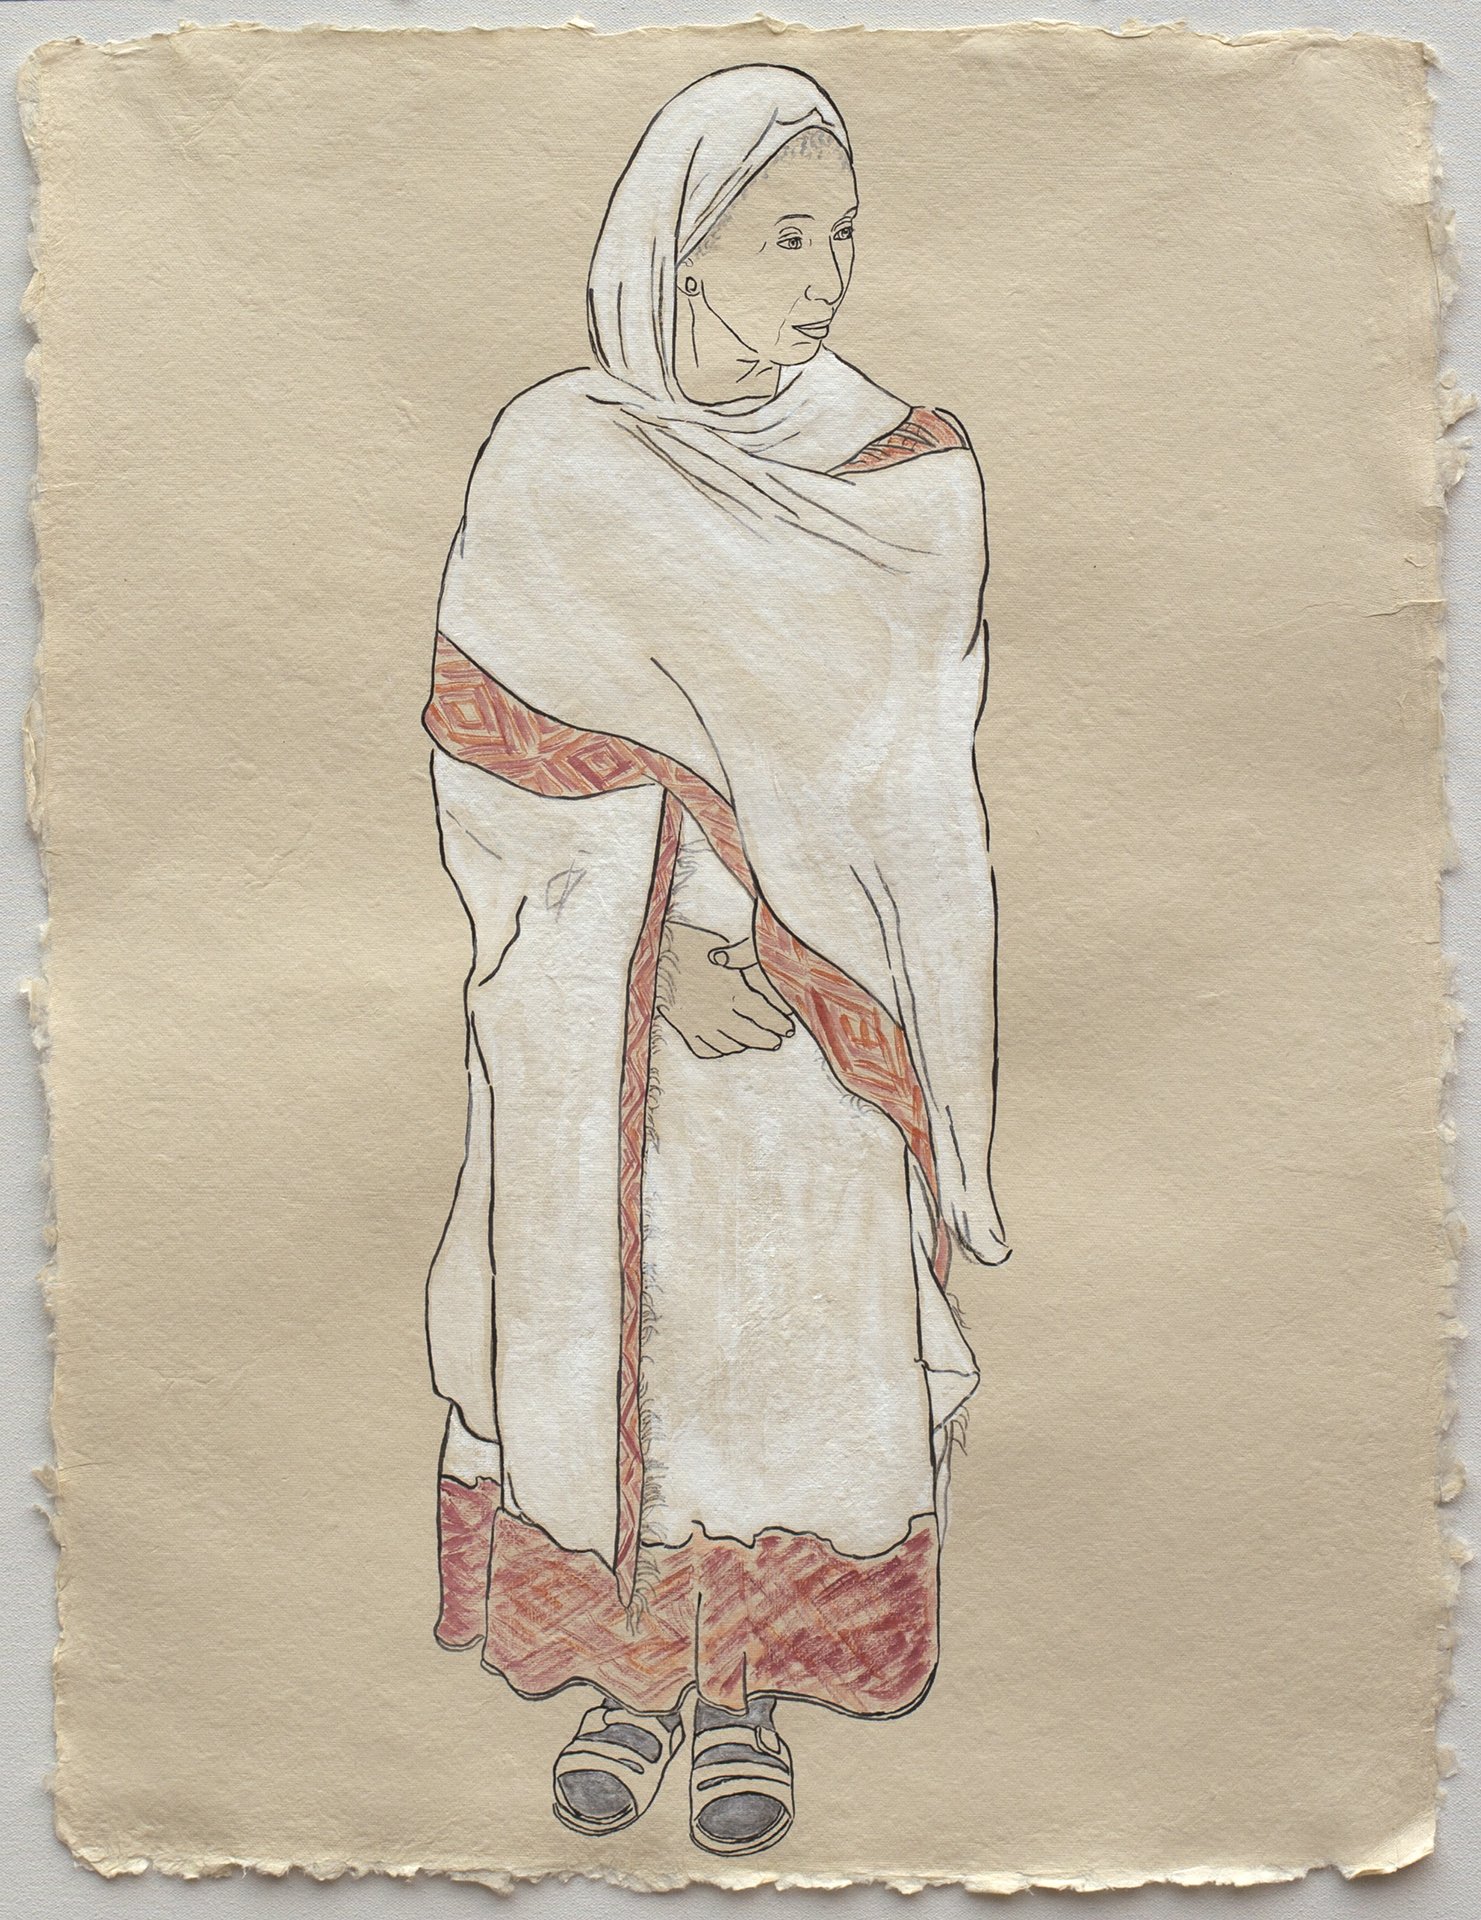   Available    Woman in White, Member of the Ethiopian Community in Seattle (Version II)   2017, Ink, watercolor, gouache on handmade paper made in India from recycled clothing, 25” x 19.” 